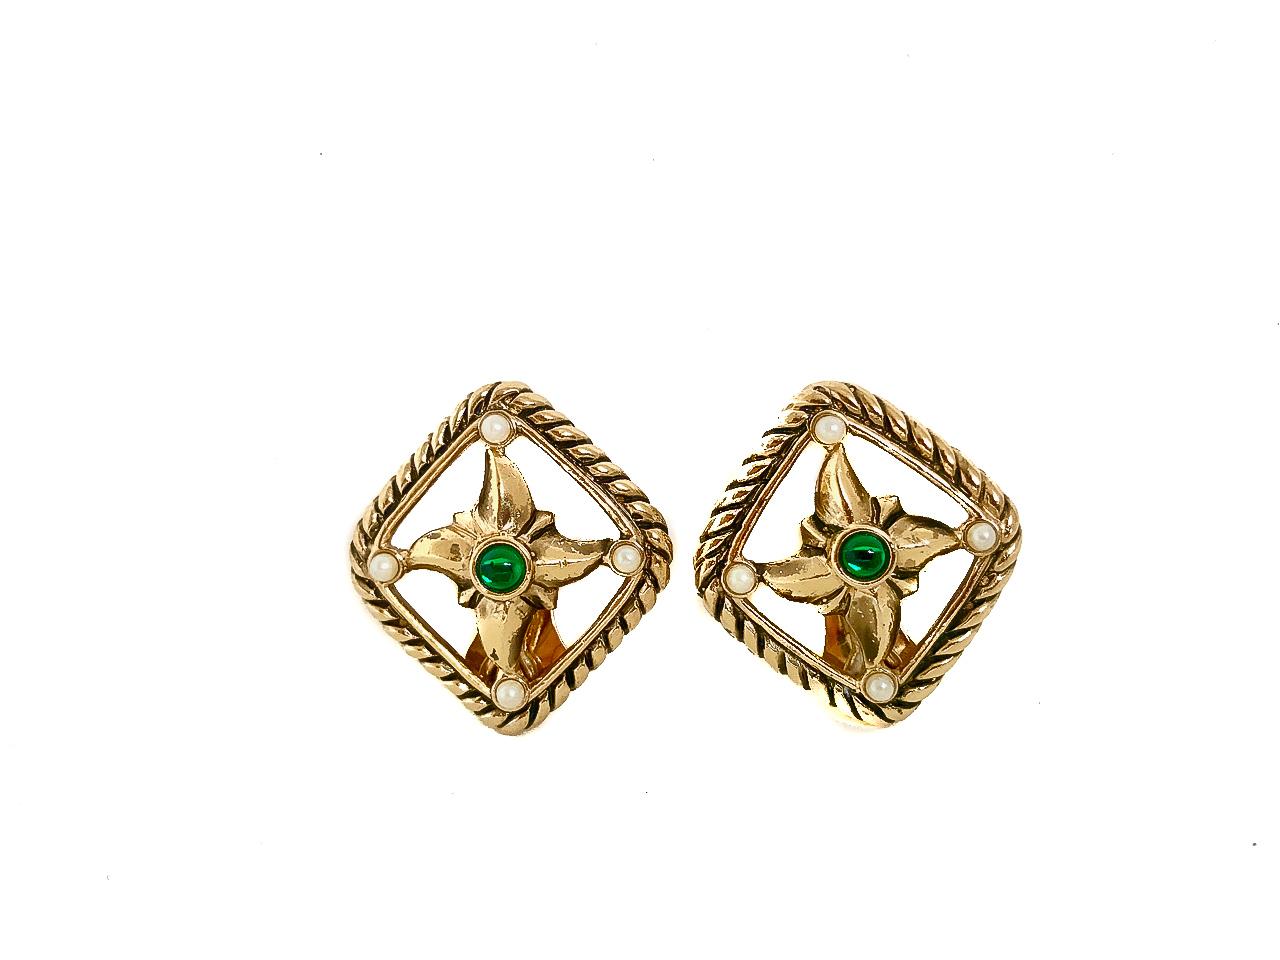 Valentino 1980s Vintage Clip On Earrings.  Diamond shaped featuring faux pearls and emeralds. Fully authenticated and signed 

Come with original Valentino box.

1.5 x 1.75 inches